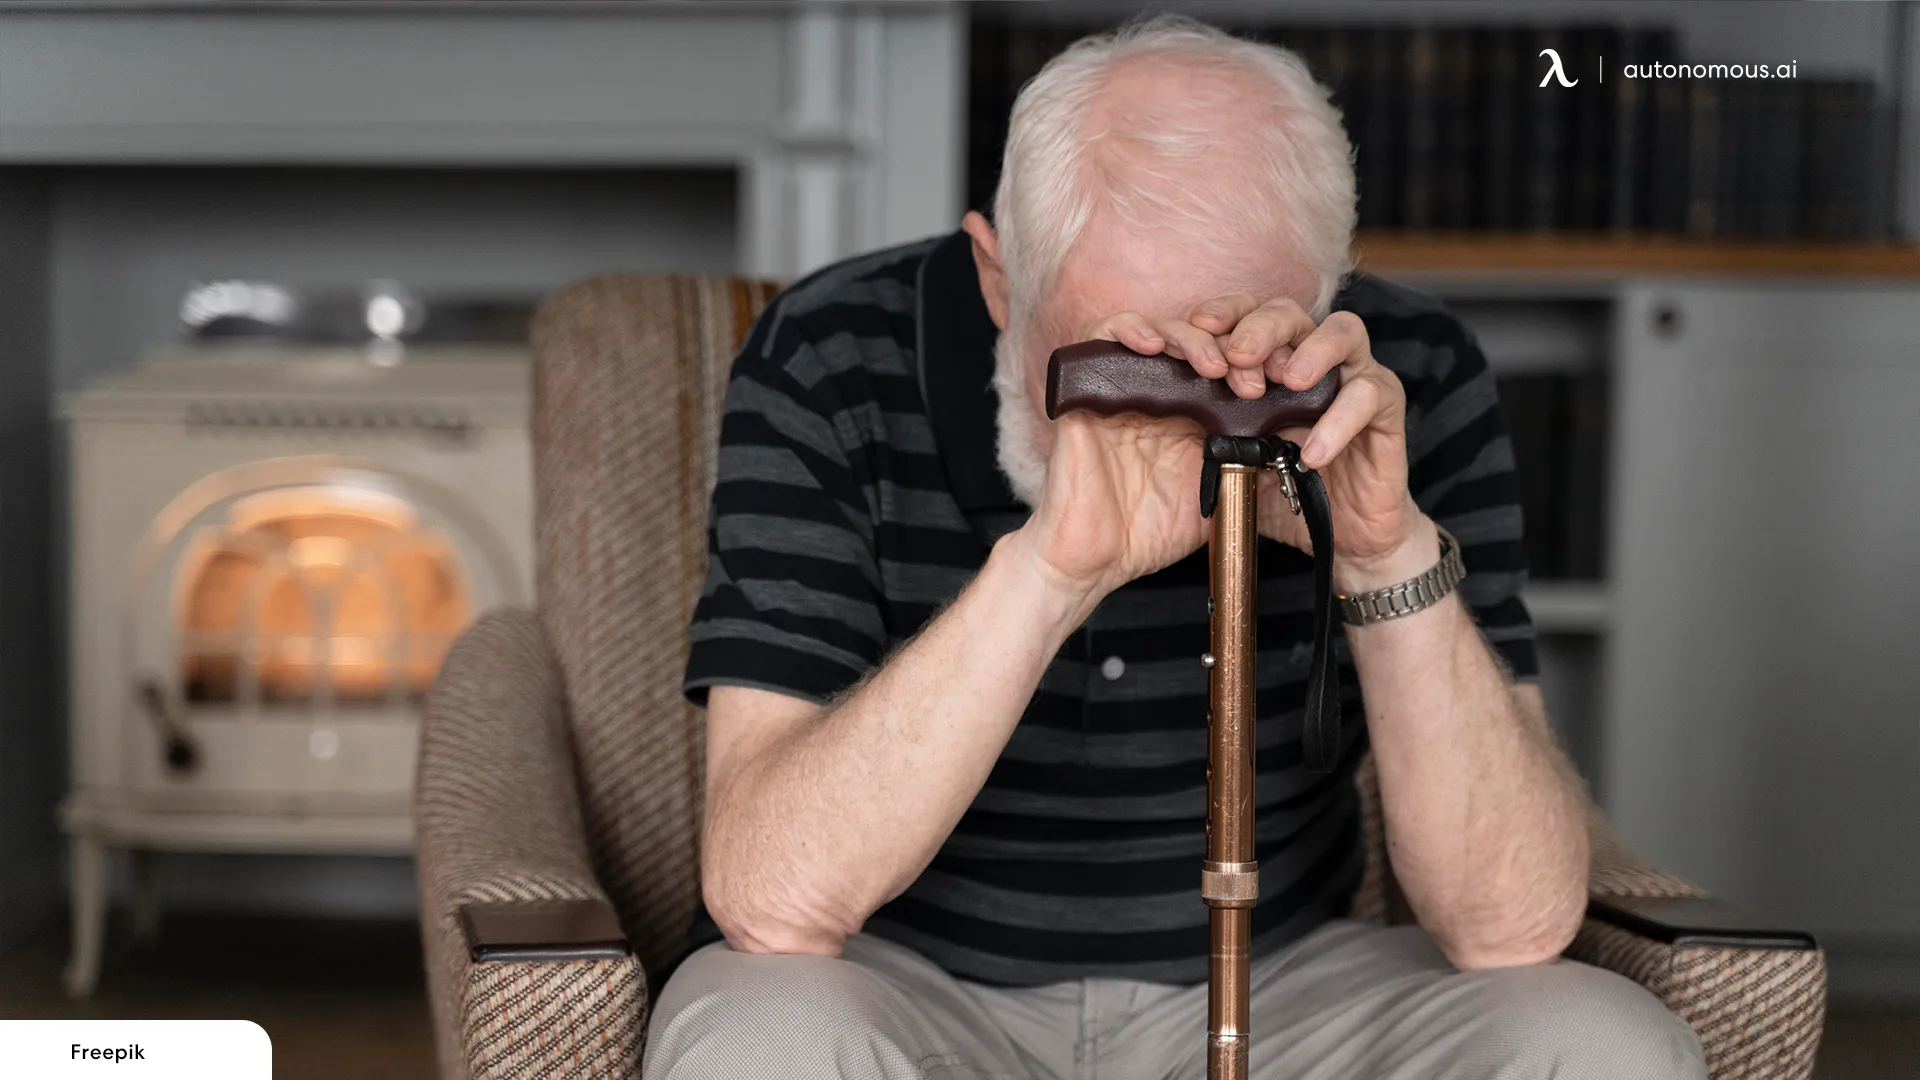 Why Do Some Elderly People Choose to Hide Their Symptoms?